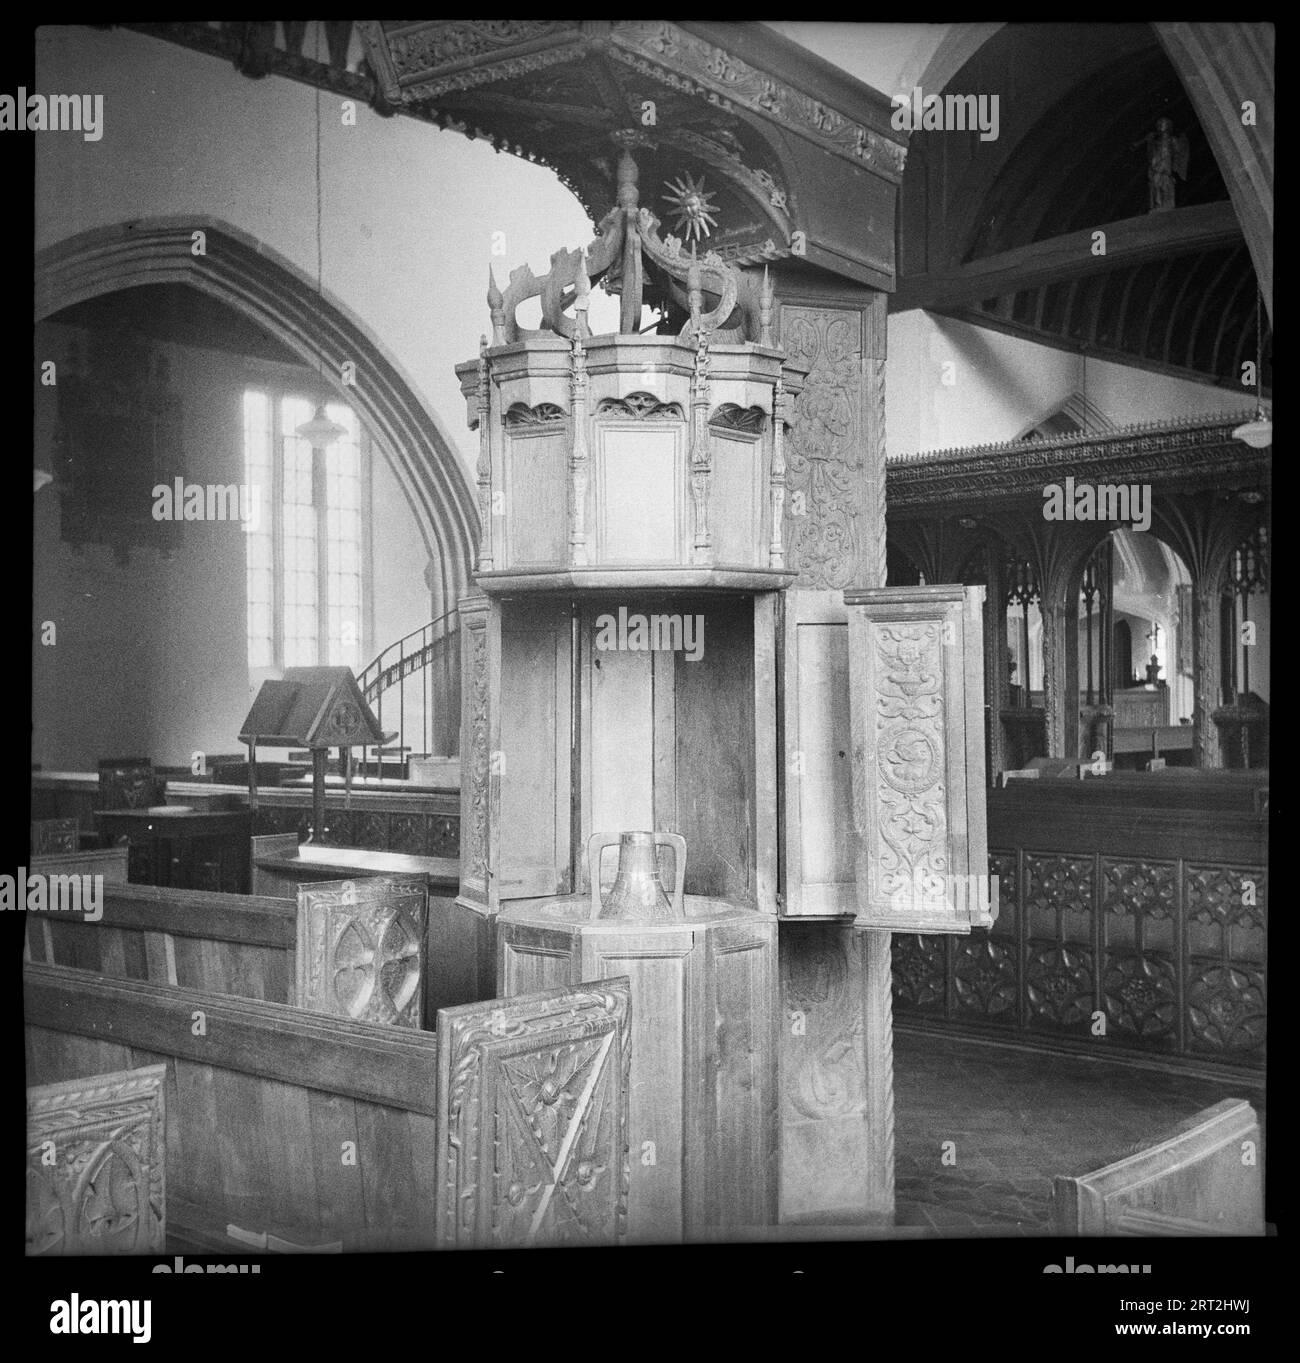 St James' Church, Swimbridge, North Devon, Devon, 1940-1962. Detail of a lead-lined Renaissance font with wooden casing that resembles a pulpit. The font has three tiers, each of which are panelled. The lower tier has plain panels, while the middle tier has decorated panels, of which some hinge open to reveal to top of the font, as seen in the image. The top panels are also plain, but are topped with pinnacles. Above this is an open crown over and a large rectangular canopy. In the background is a chancel screen which crosses the church and was restored in 1880, and above this is an angel stat Stock Photo